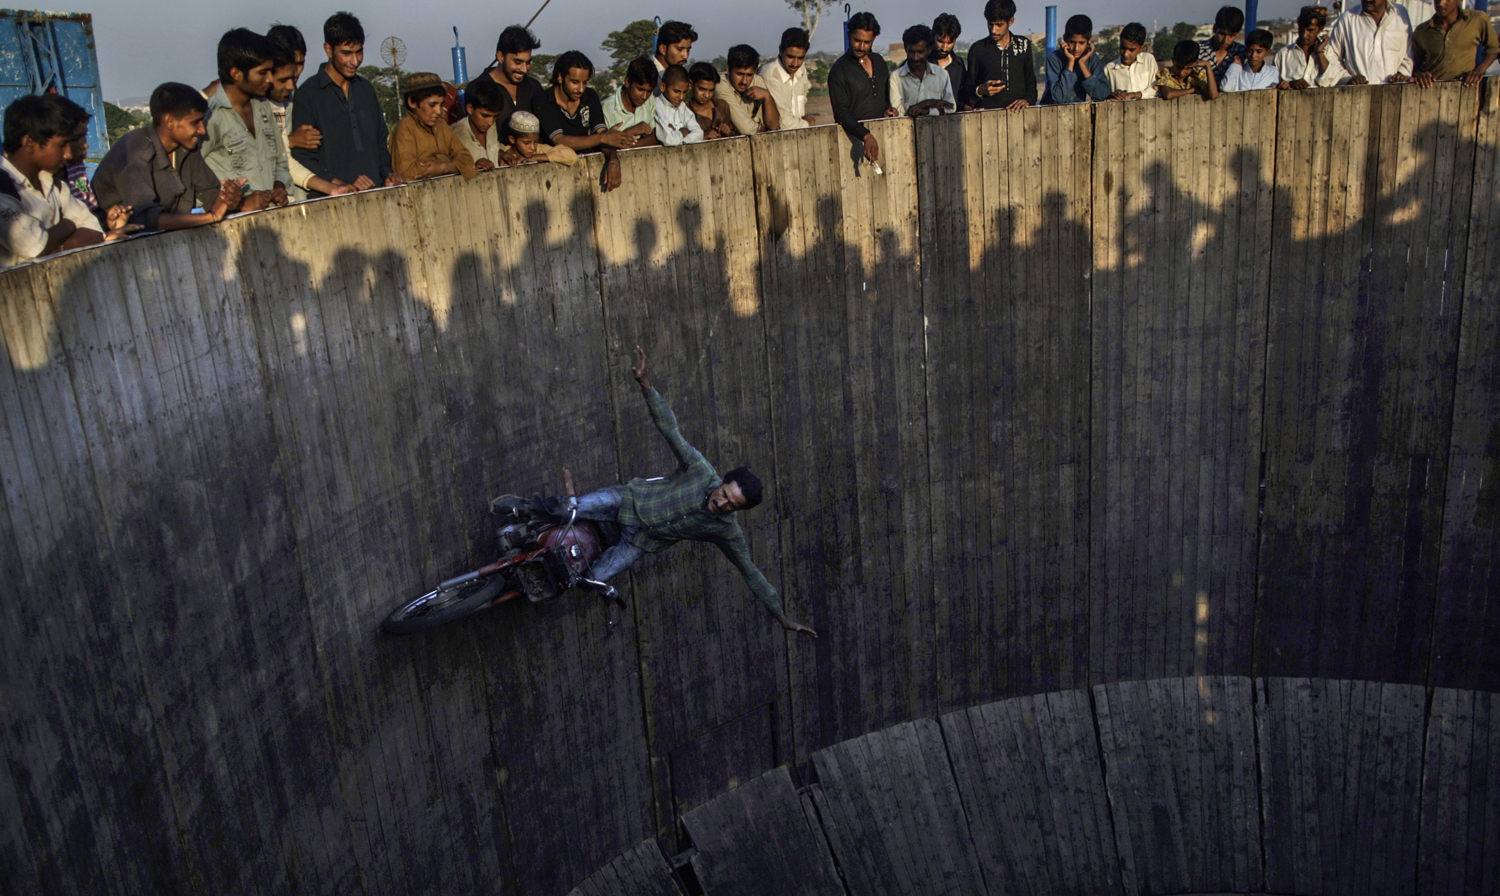 Pakistanis watch as an acrobat rides his motorcycle around a circular track, at an entertainment park set up outside a shrine in Rawalpindi, Pakistan, June 19, 2013.